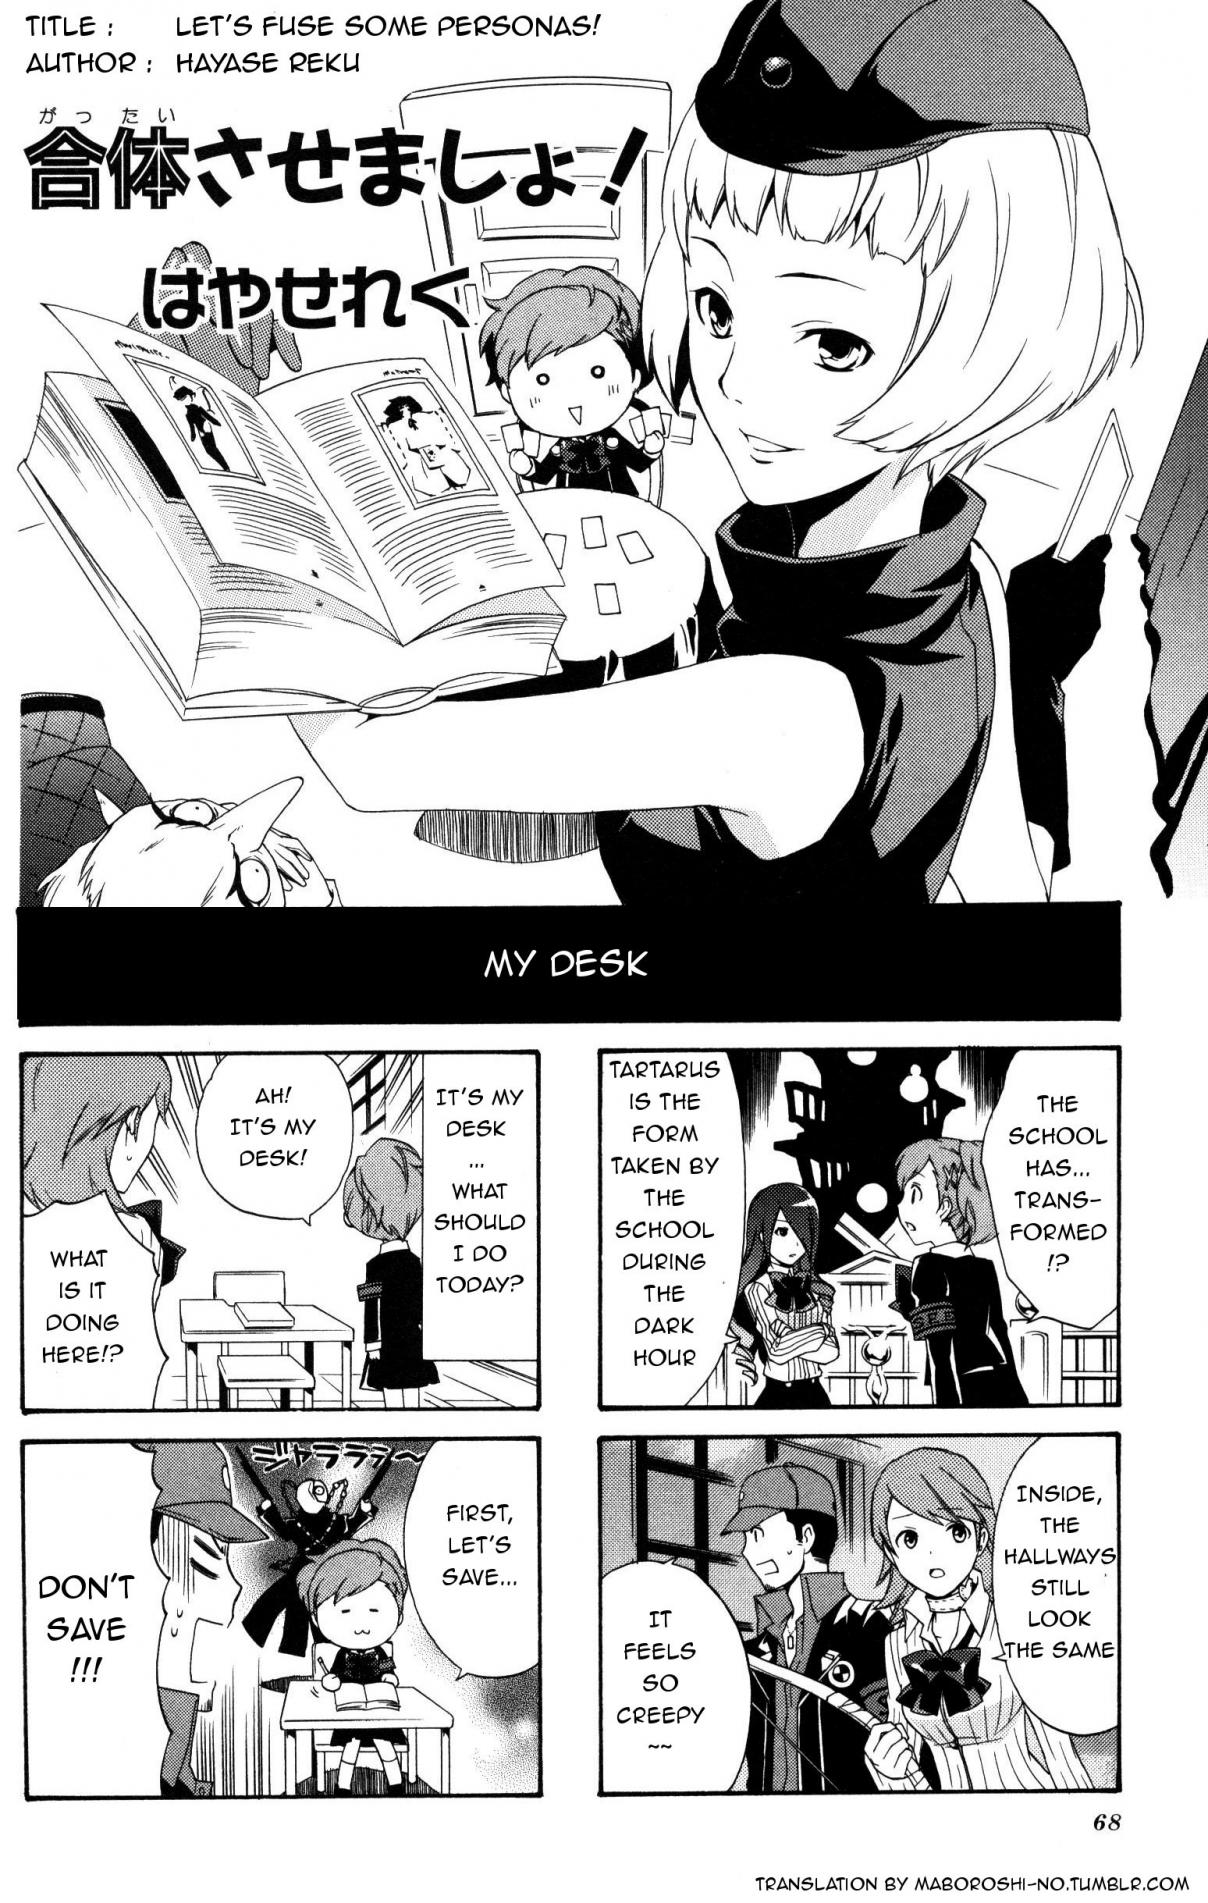 Persona 3 Portable 4Koma Gag Battle Ch. 12 Let's fuse some personas